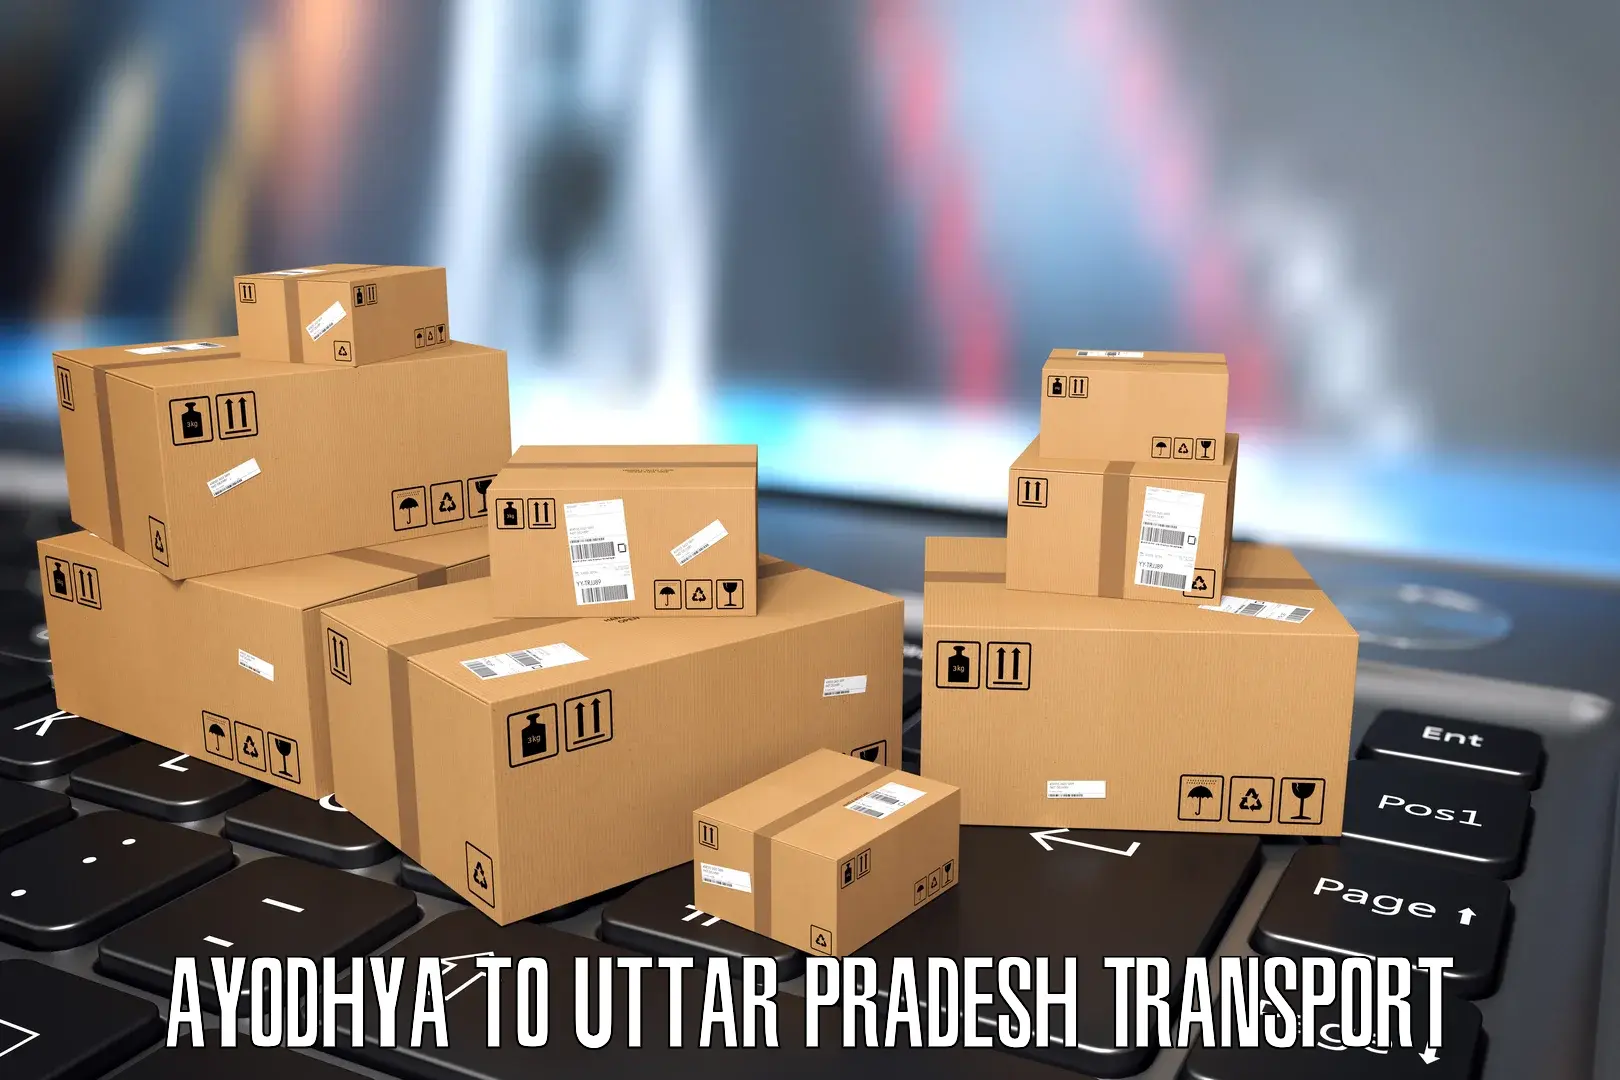 Transport shared services Ayodhya to Lucknow